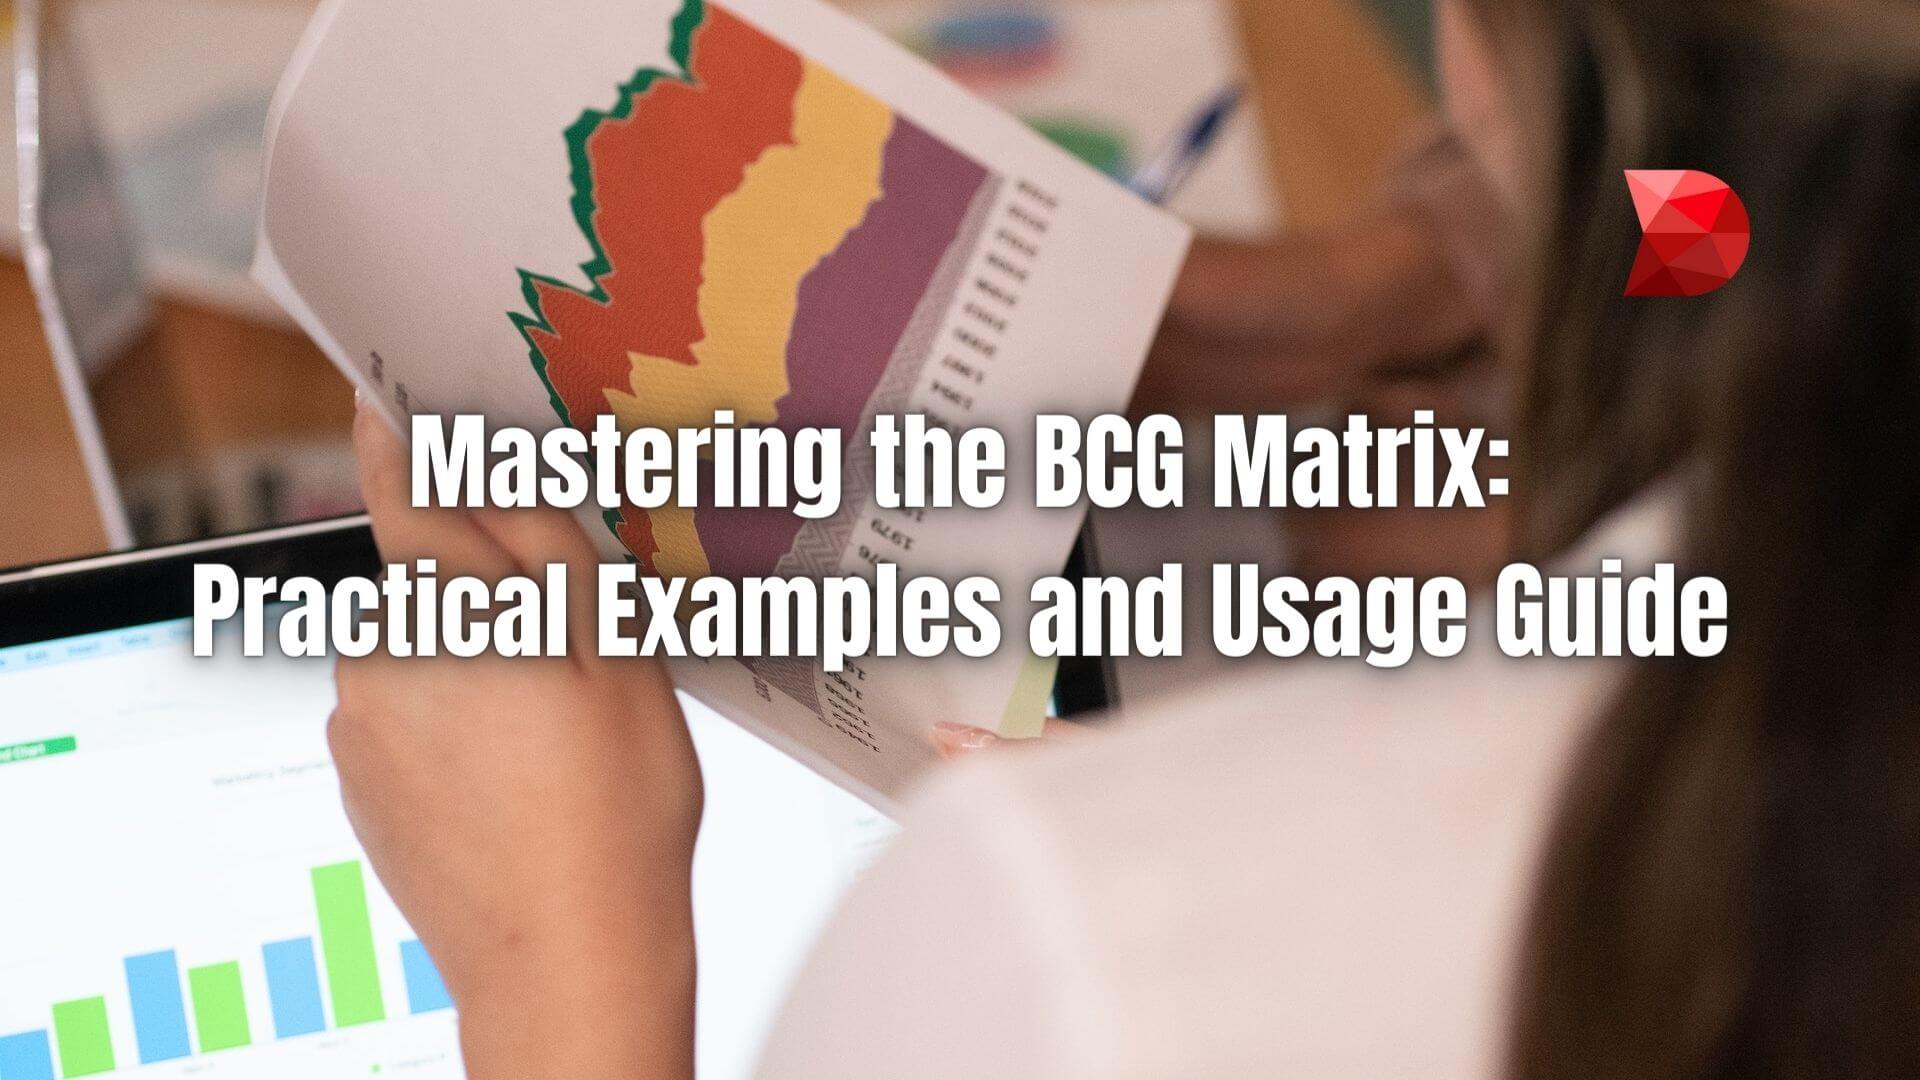 The BCG Matrix is a powerful tool businesses use to evaluate their product portfolios and identify areas for potential growth. Learn more!